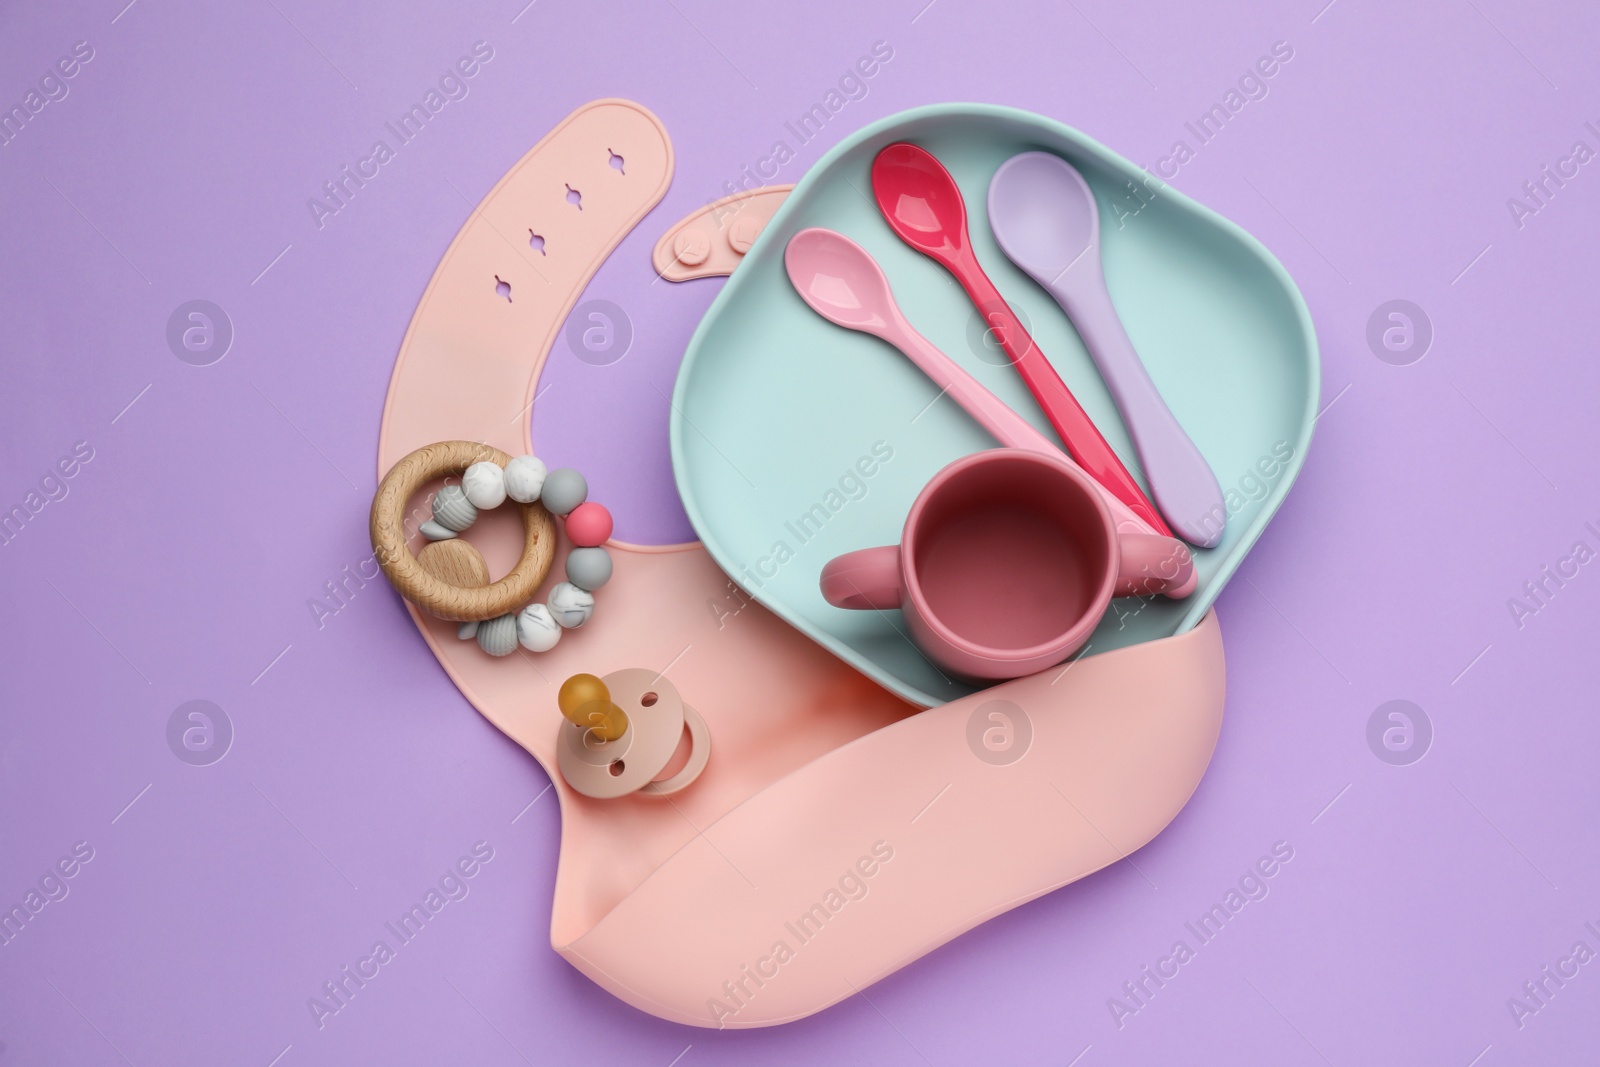 Photo of Set of plastic dishware, silicone bib and baby accessories on violet background, flat lay